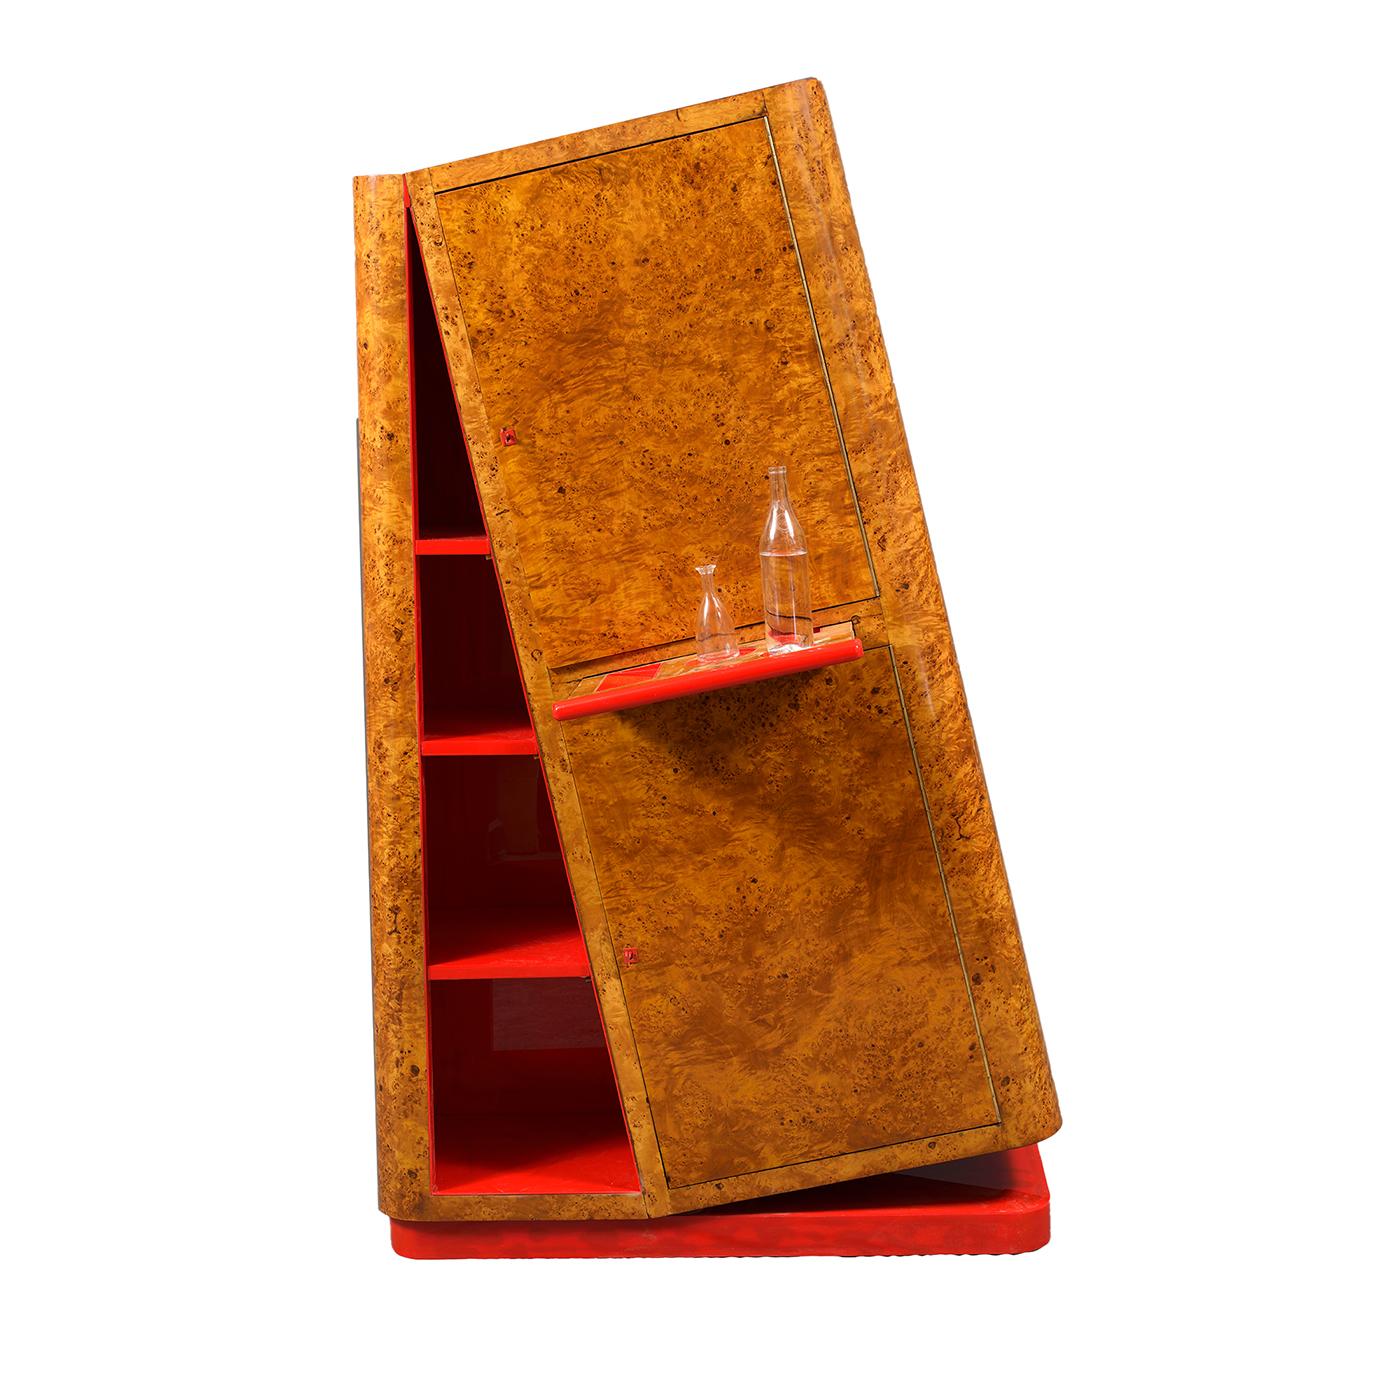 A dynamic design of Futuristic inspiration playing with a sense of impactful deceptive disequilibrium, this cupboard is sure to take center stage in eclectic modern homes. Vivid red accents the interior and the base, while the wooden external